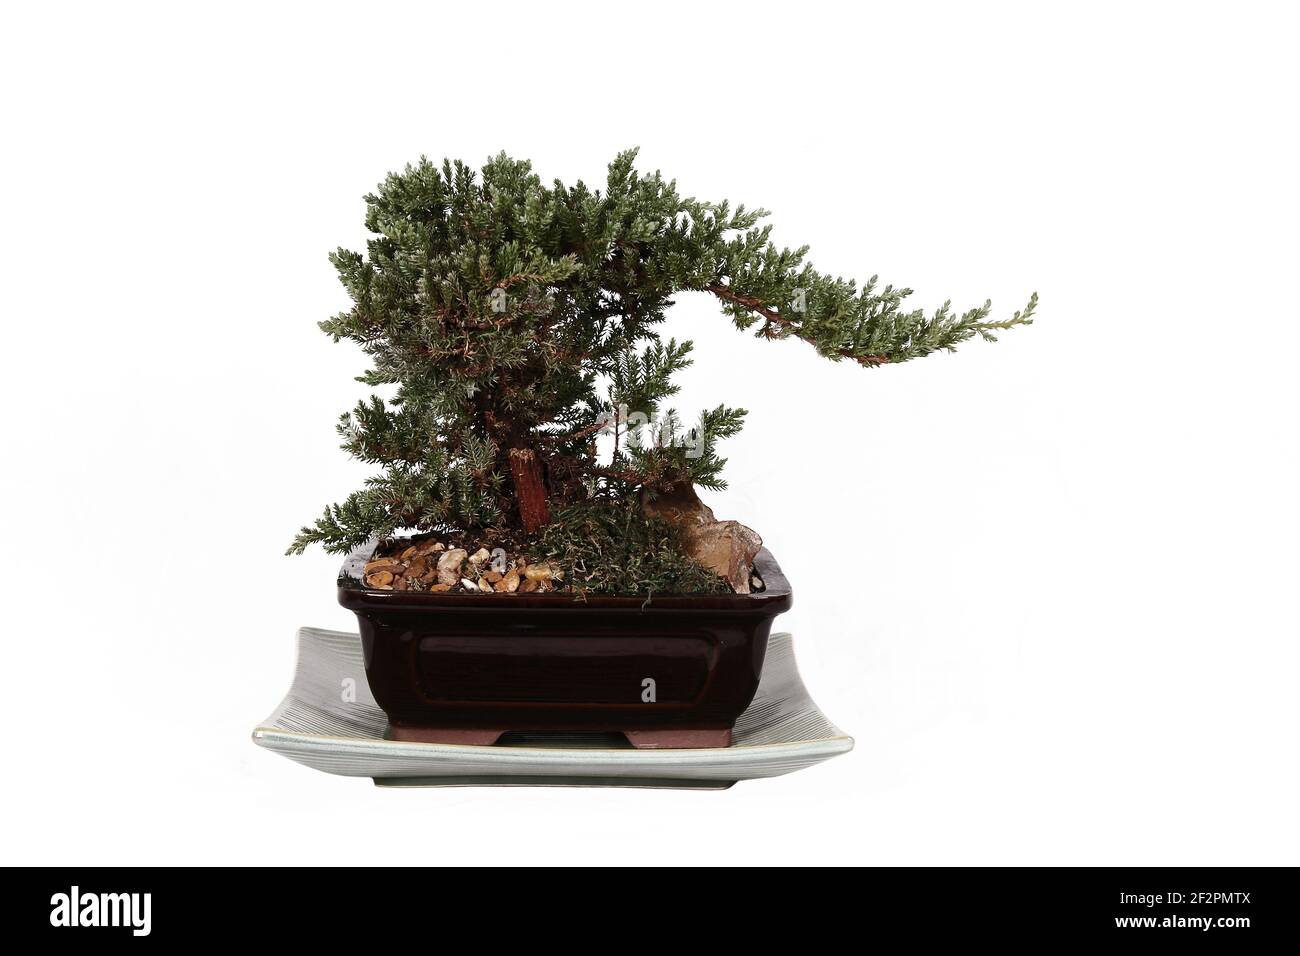 Potted mini Bonsai Japanese house tree cut out on a white background with one extruding branch as possible messy cultivation Stock Photo